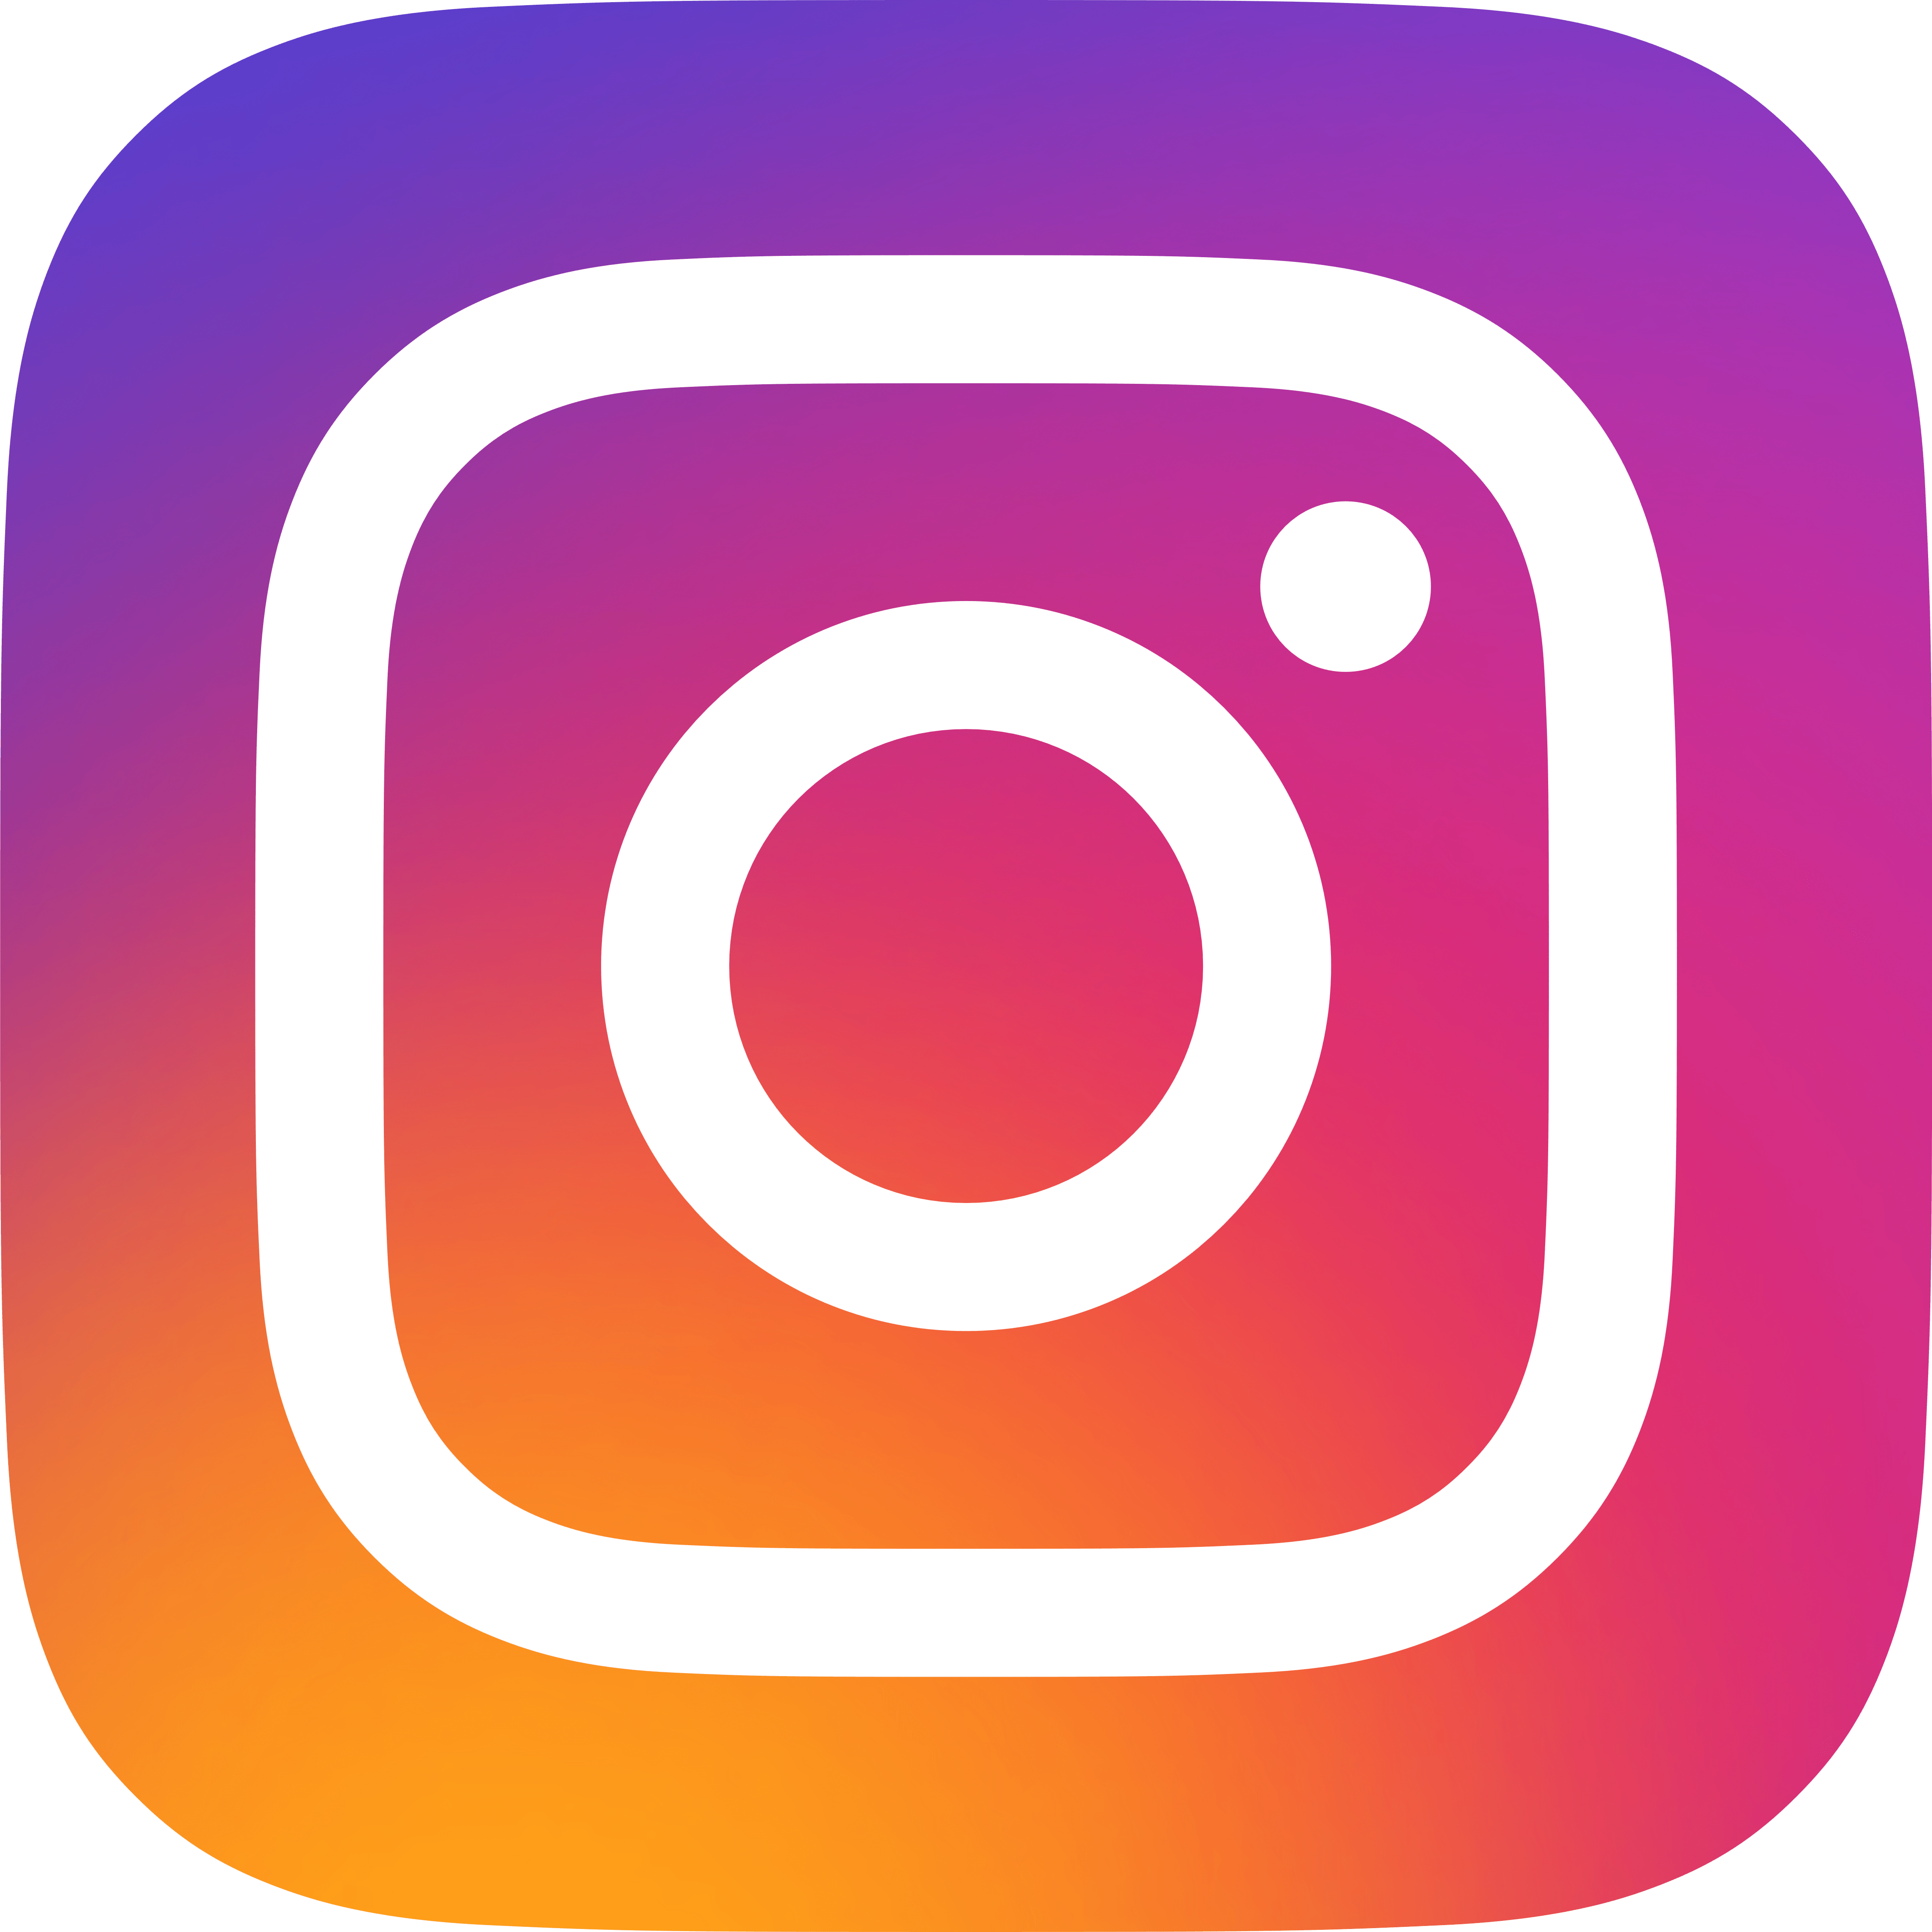 Cute Instagram Logo - Download LOGO INSTAGRAM Free PNG transparent image and clipart